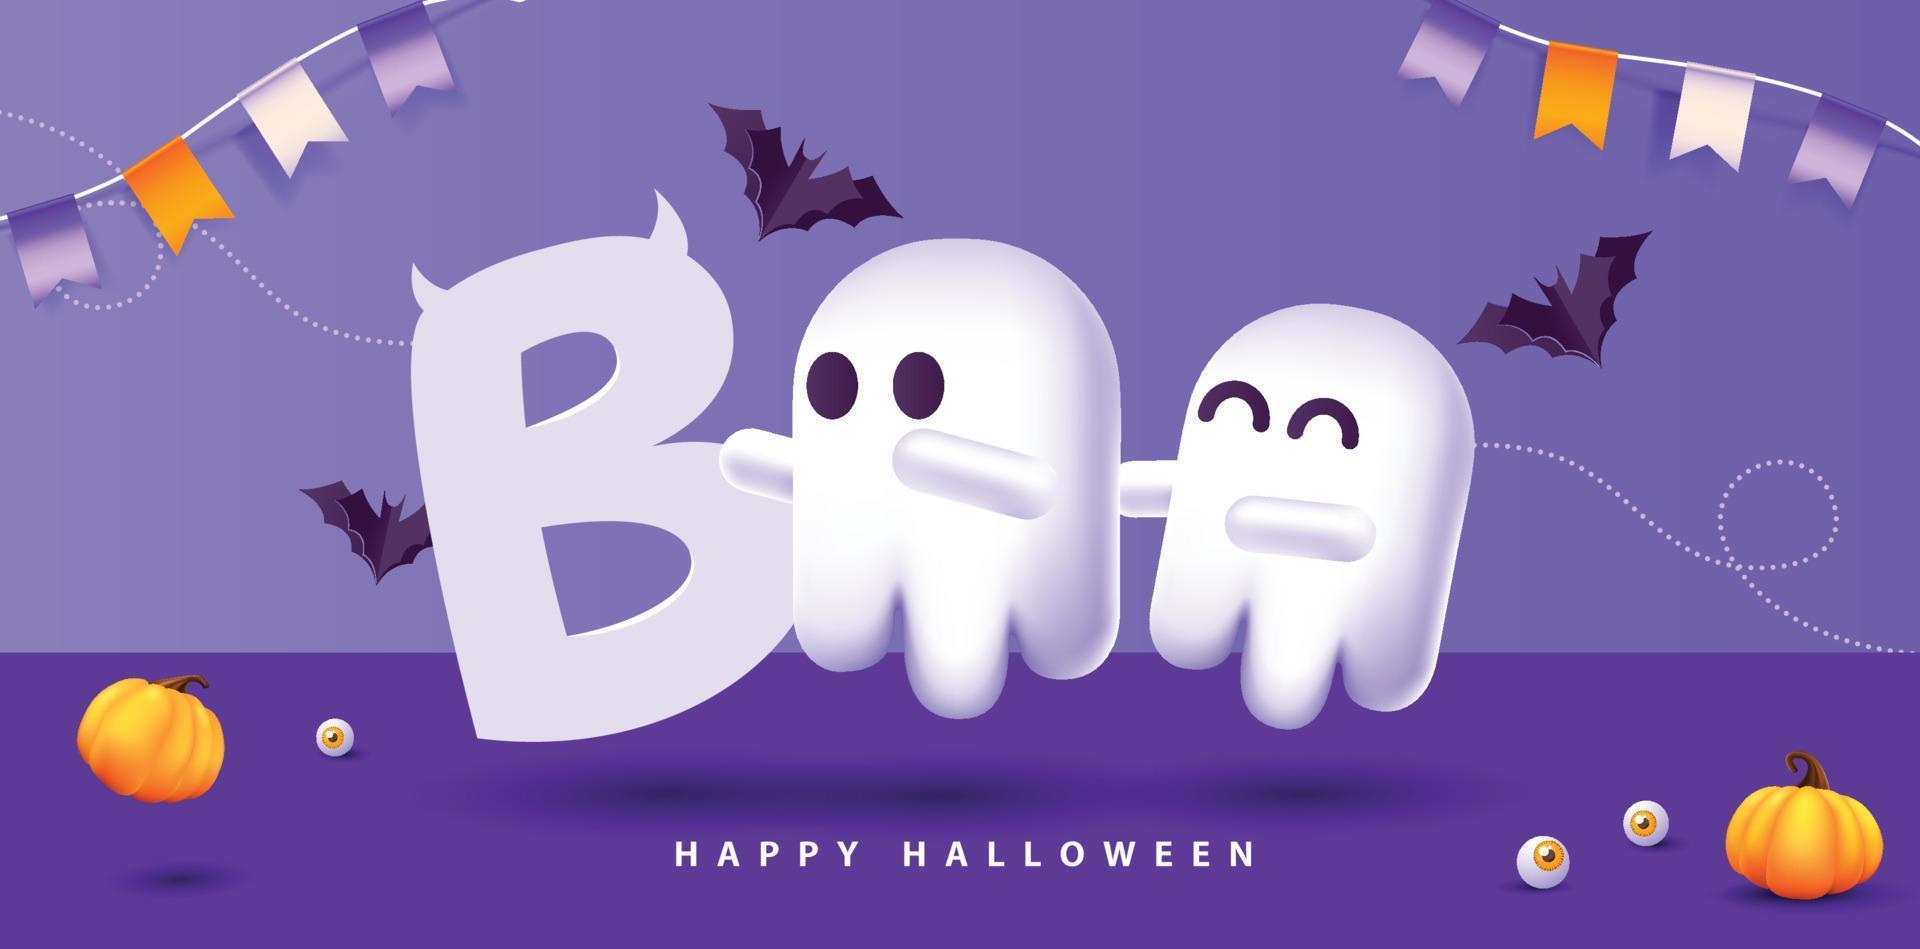 Halloween banner design with cute ghost boo typography and pumpkins Festive Elements Halloween vector